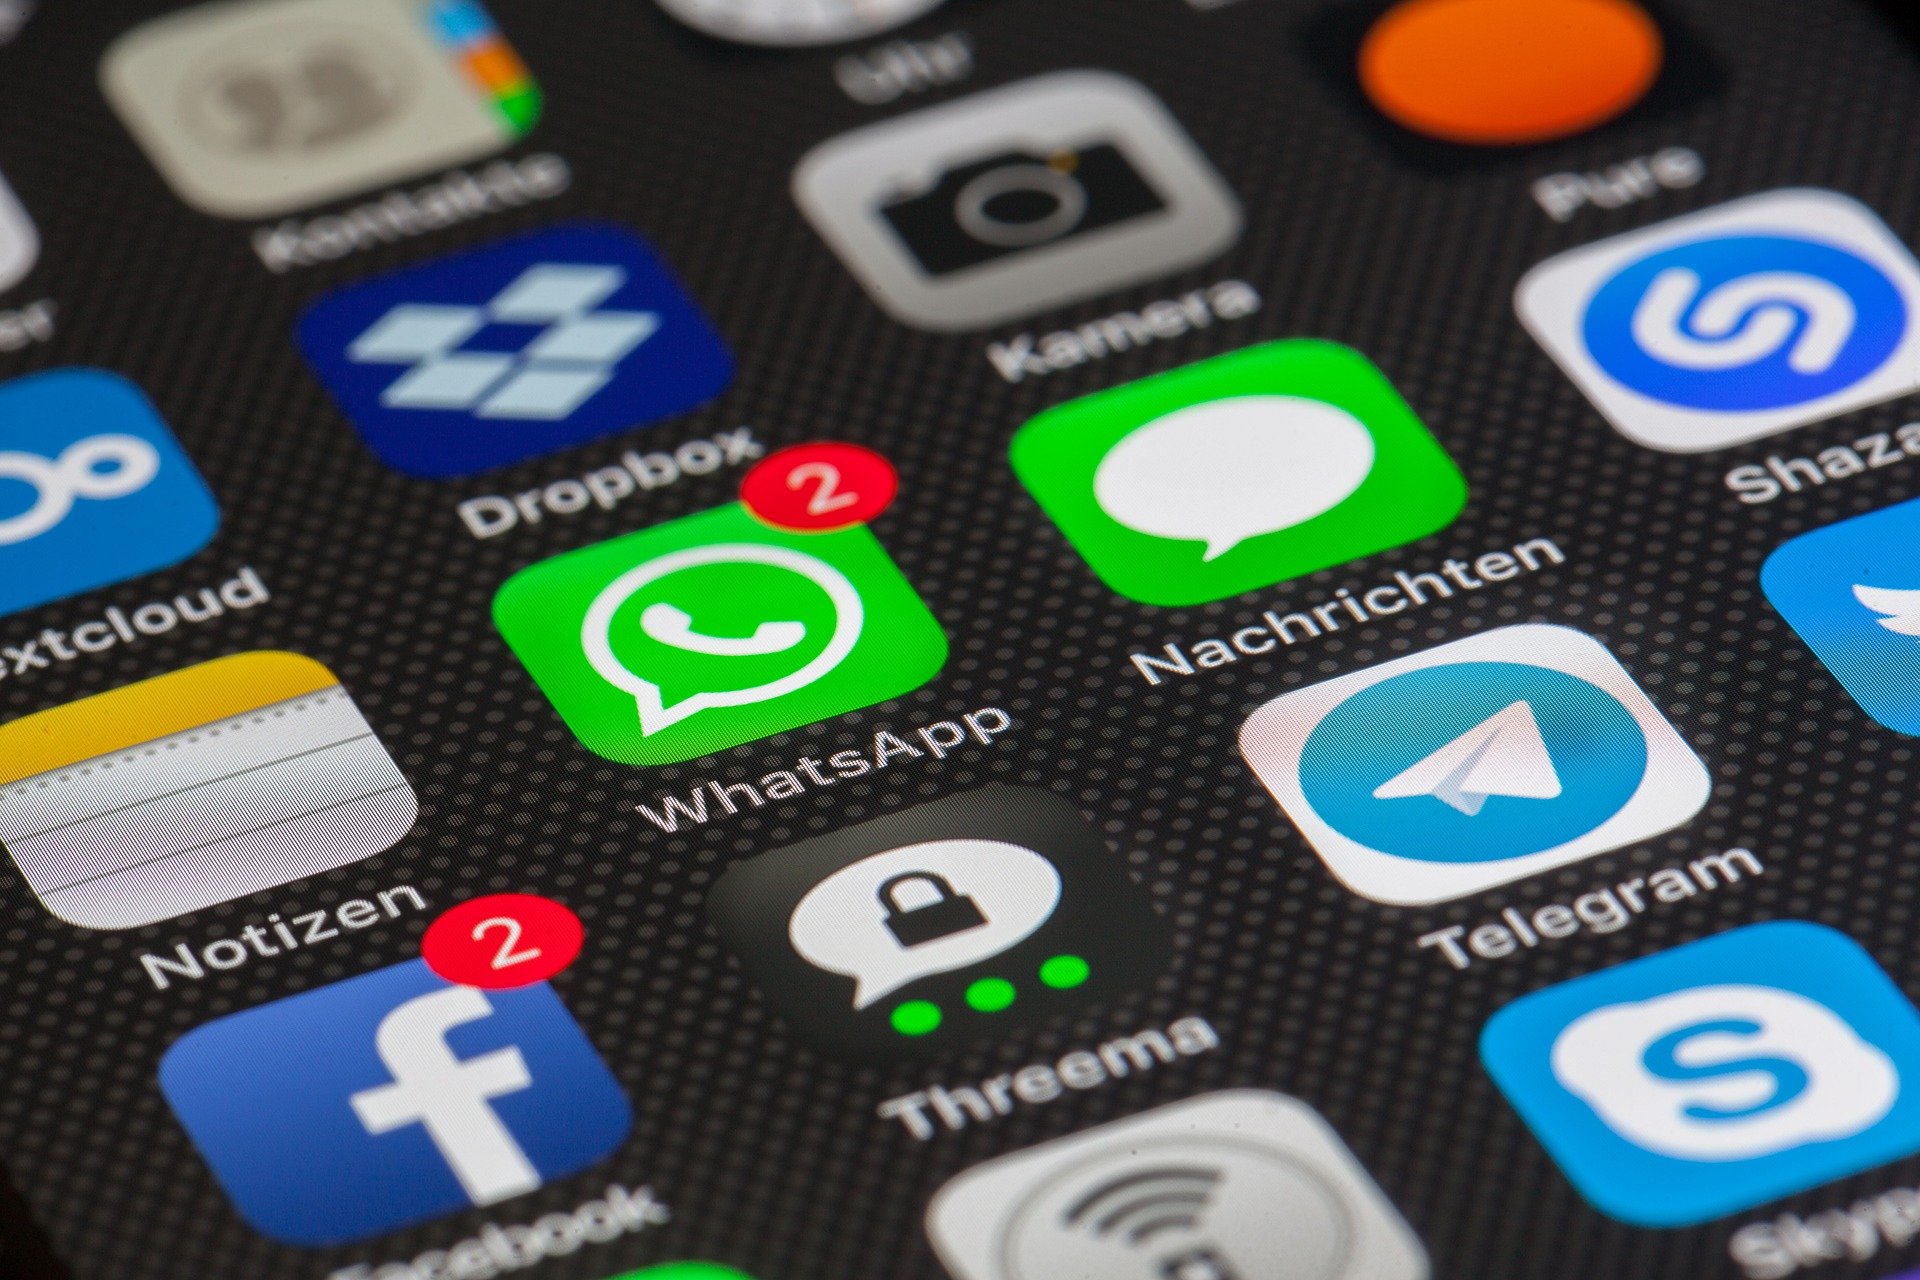 The Police warn of a new form of scam on WhatsApp